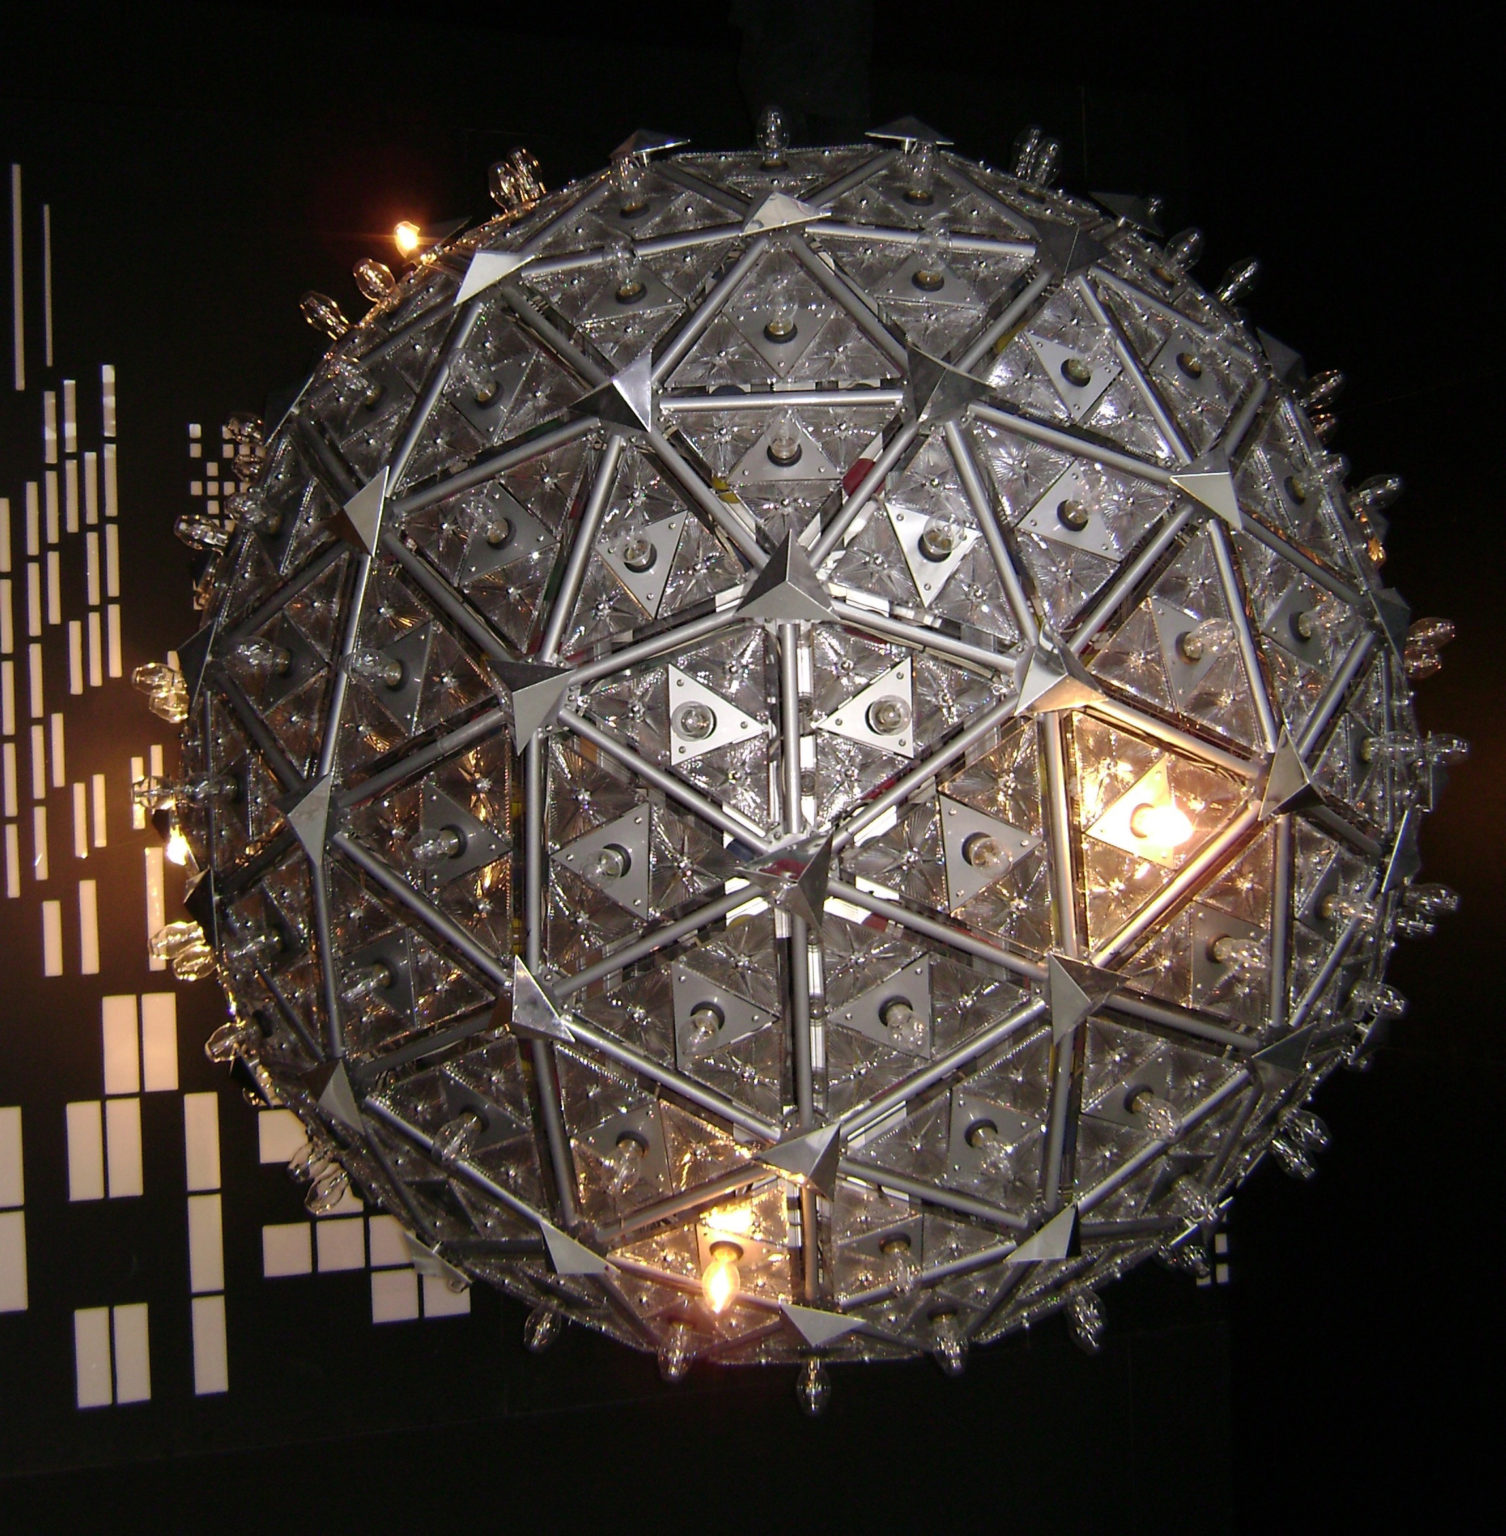 Weekly CommentTimes Square’s Waterford Crystal New Year’s Eve Ball